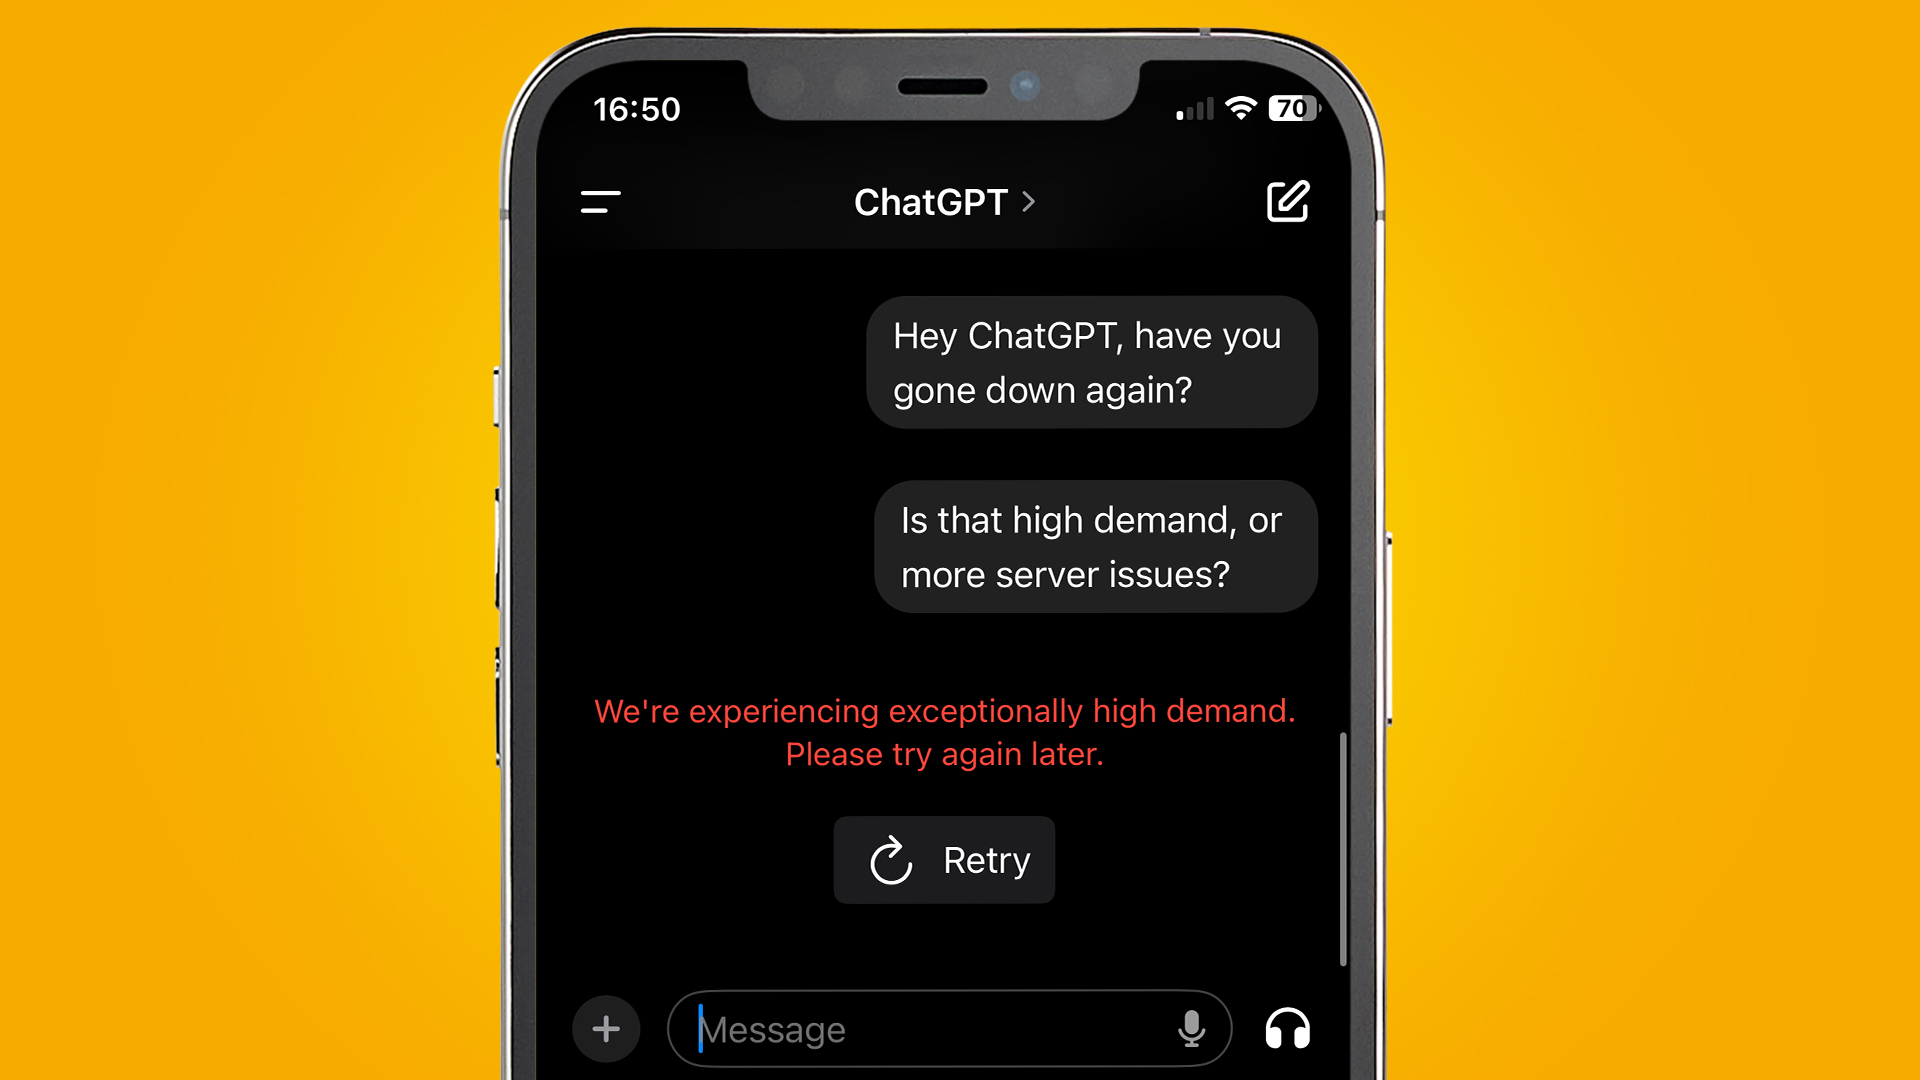 A smartphone on an orange background showing the ChatGPT app